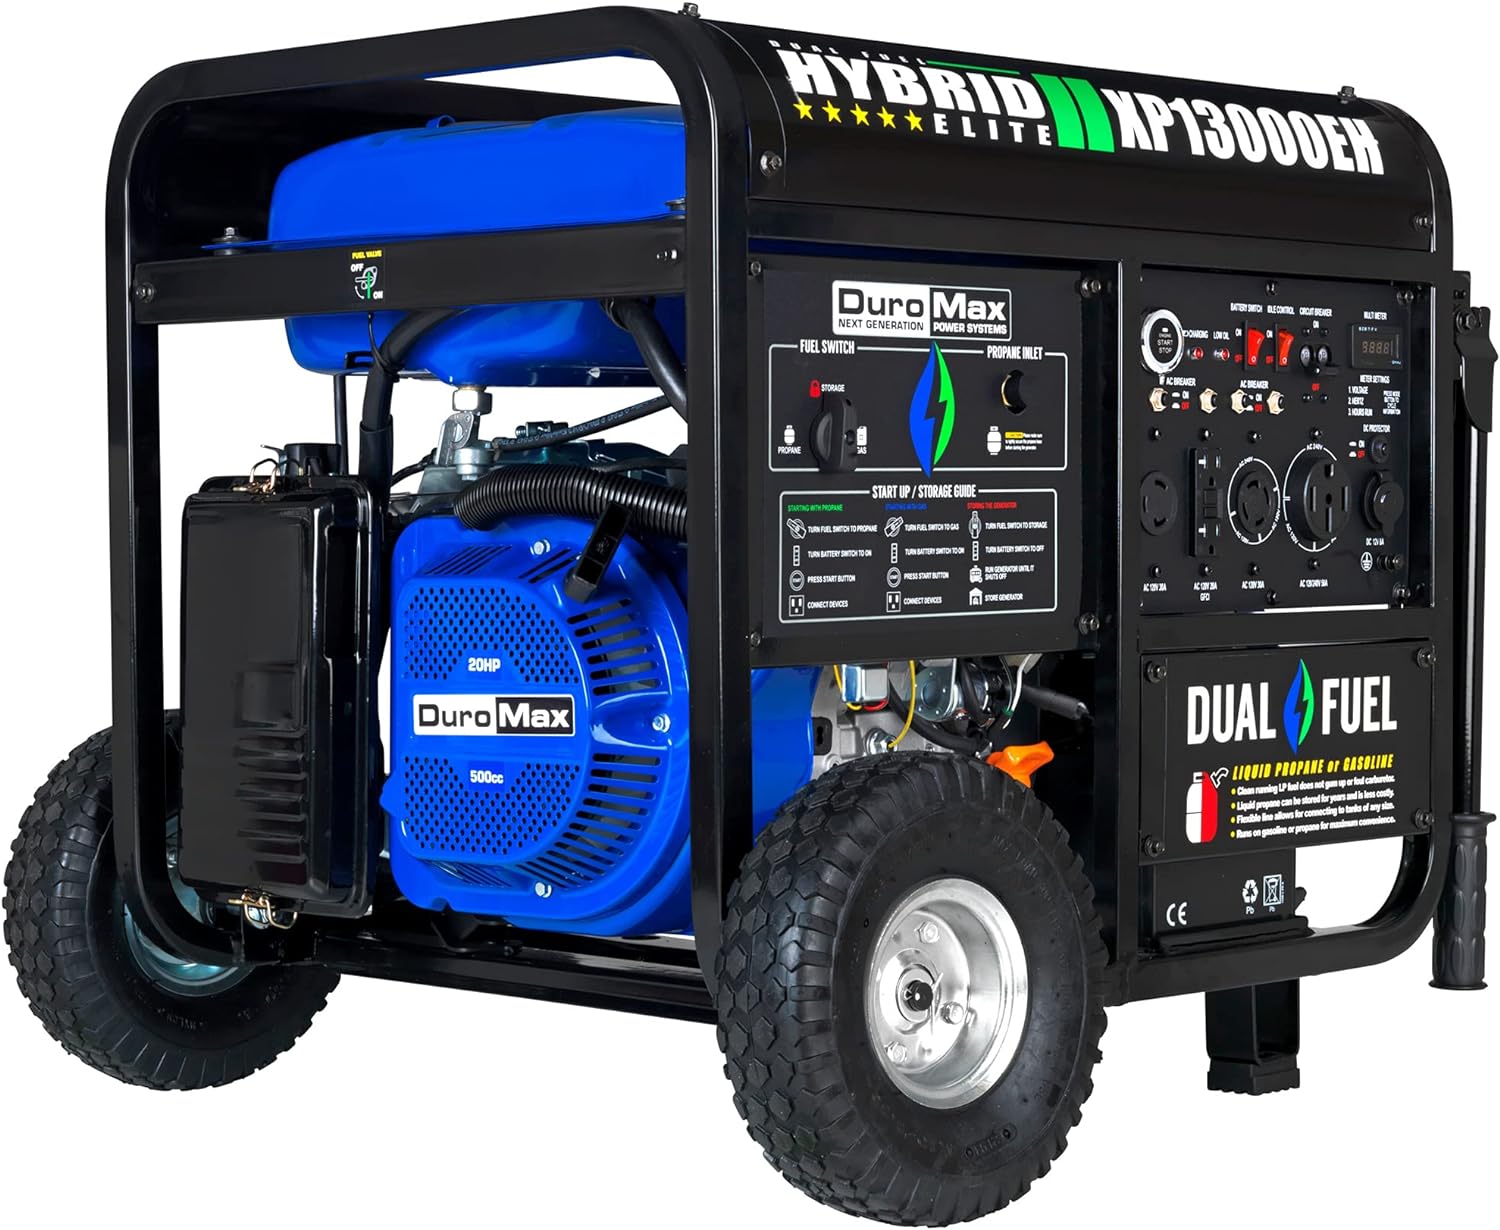 DuroMax XP13000EH Dual Fuel Portable Generator Review